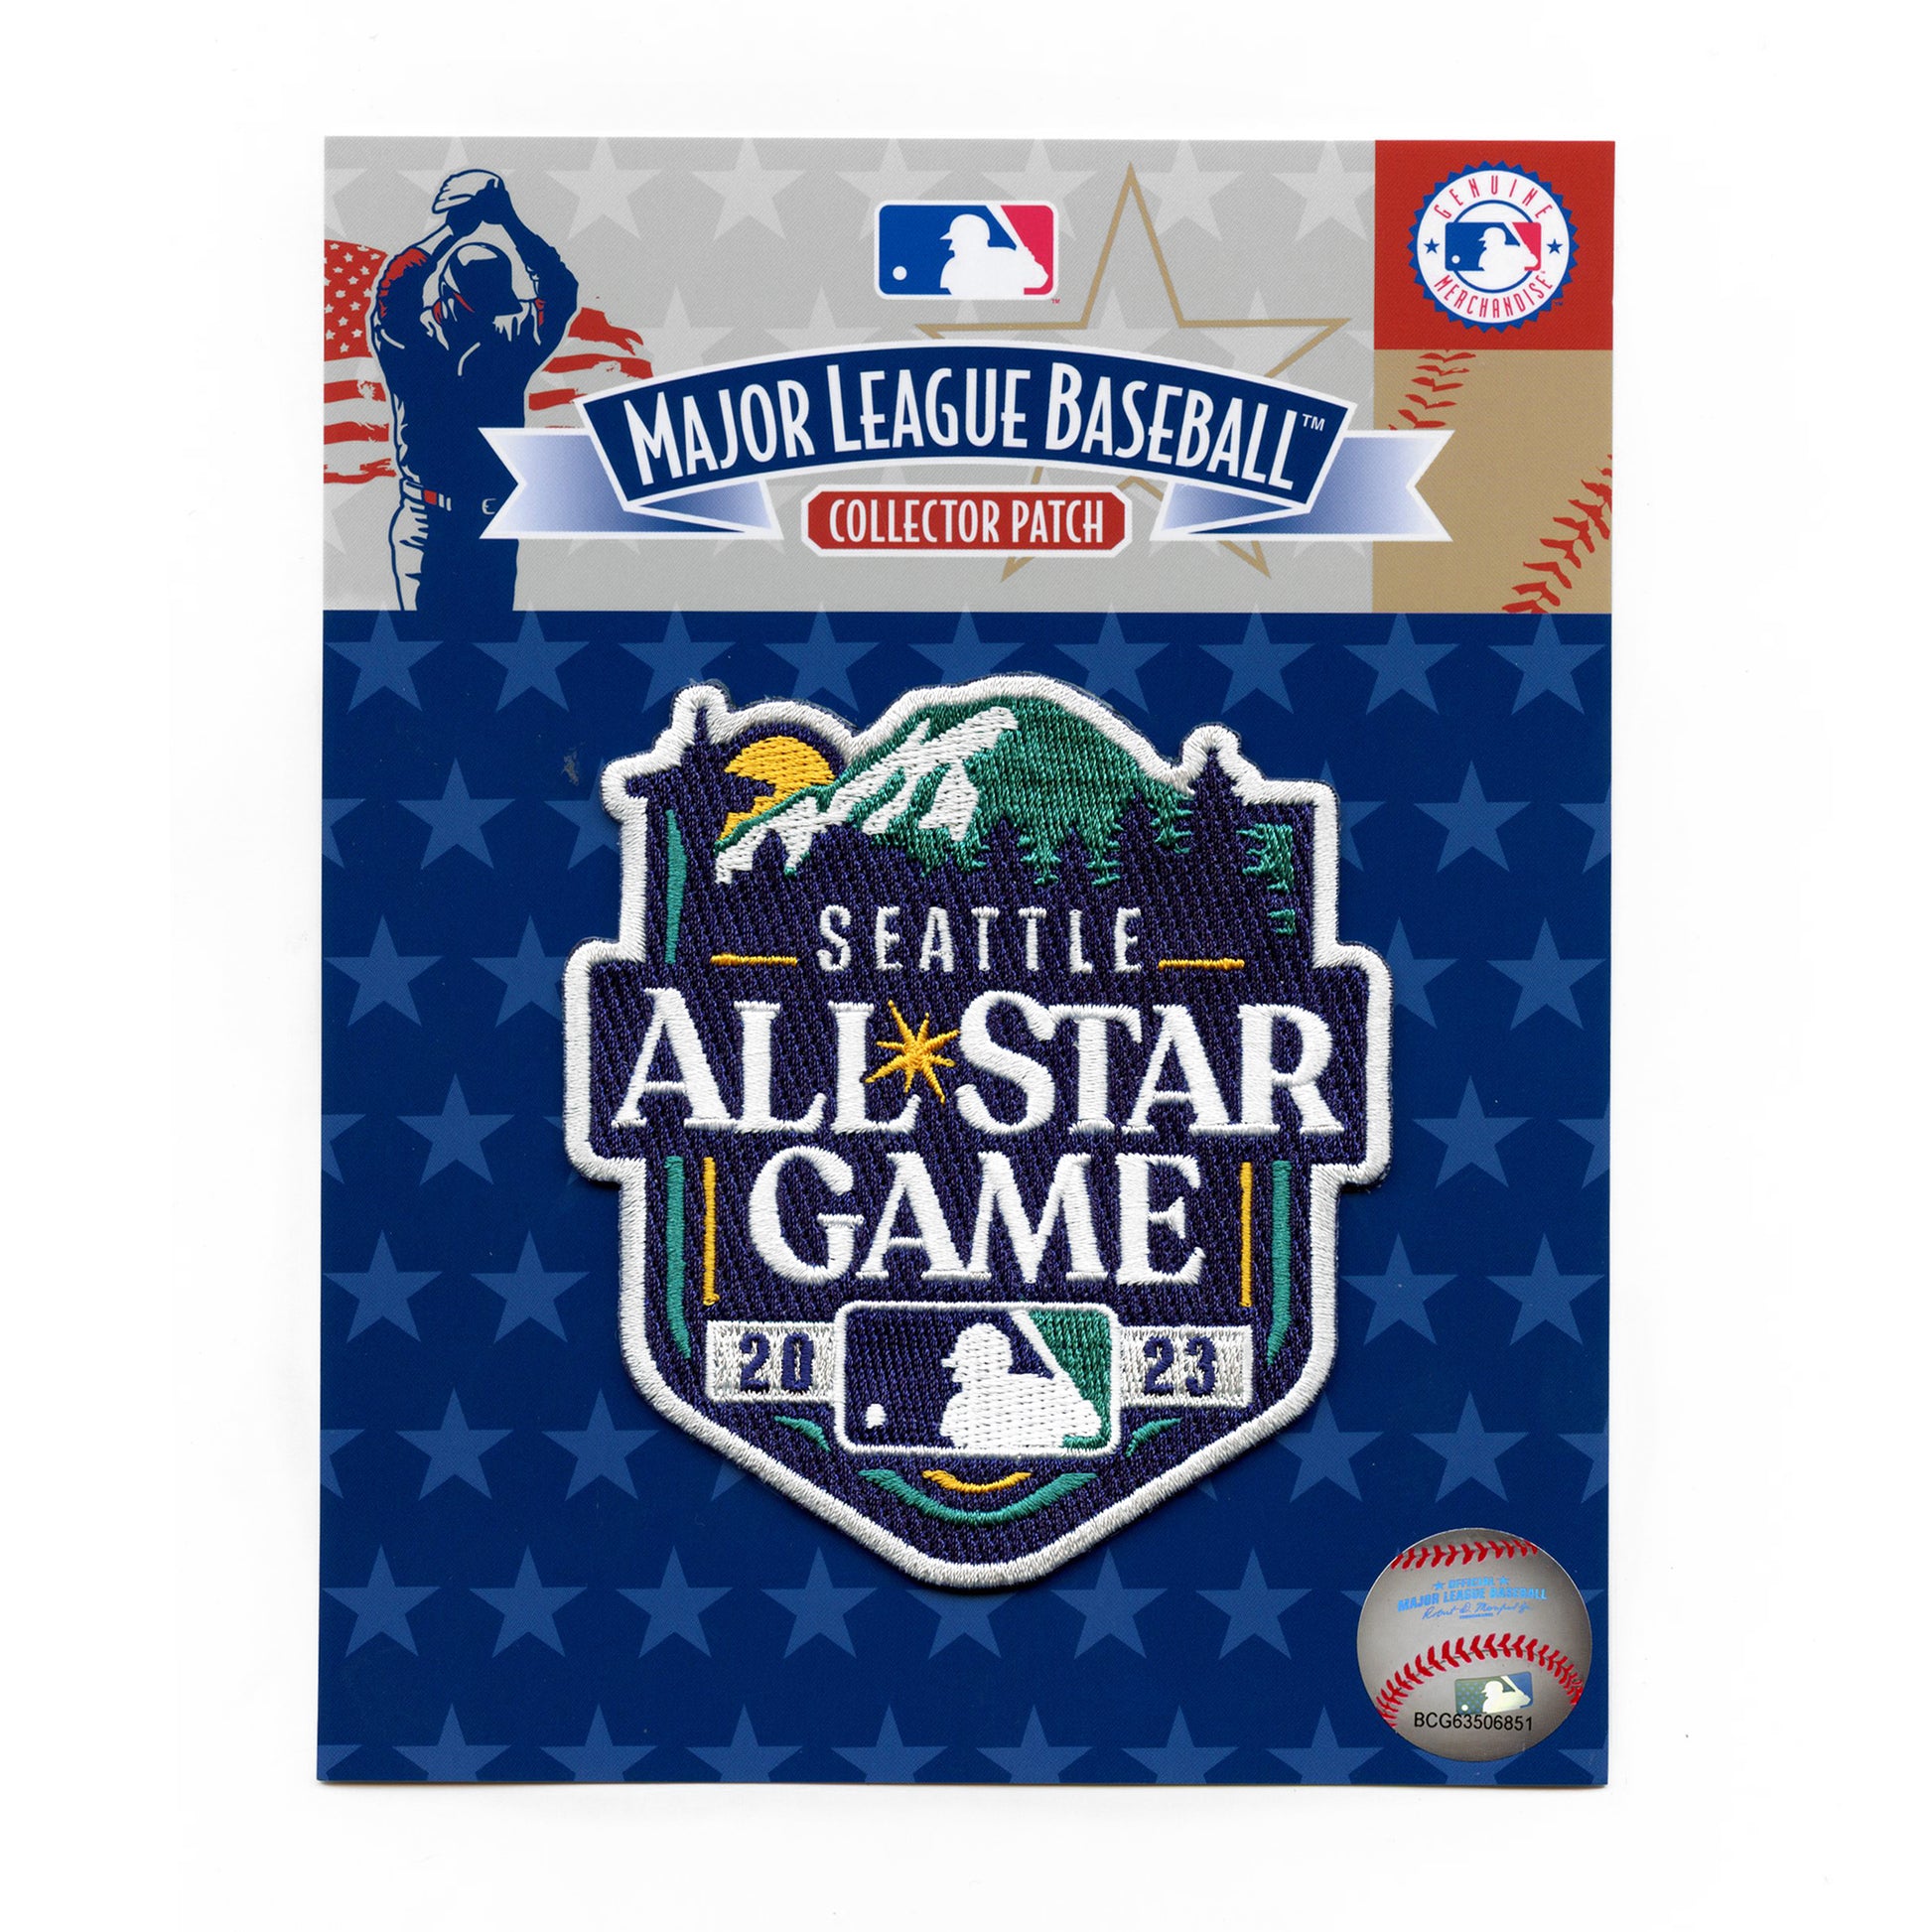 View Pin: Seattle Mariner Mickey All Star Game pin